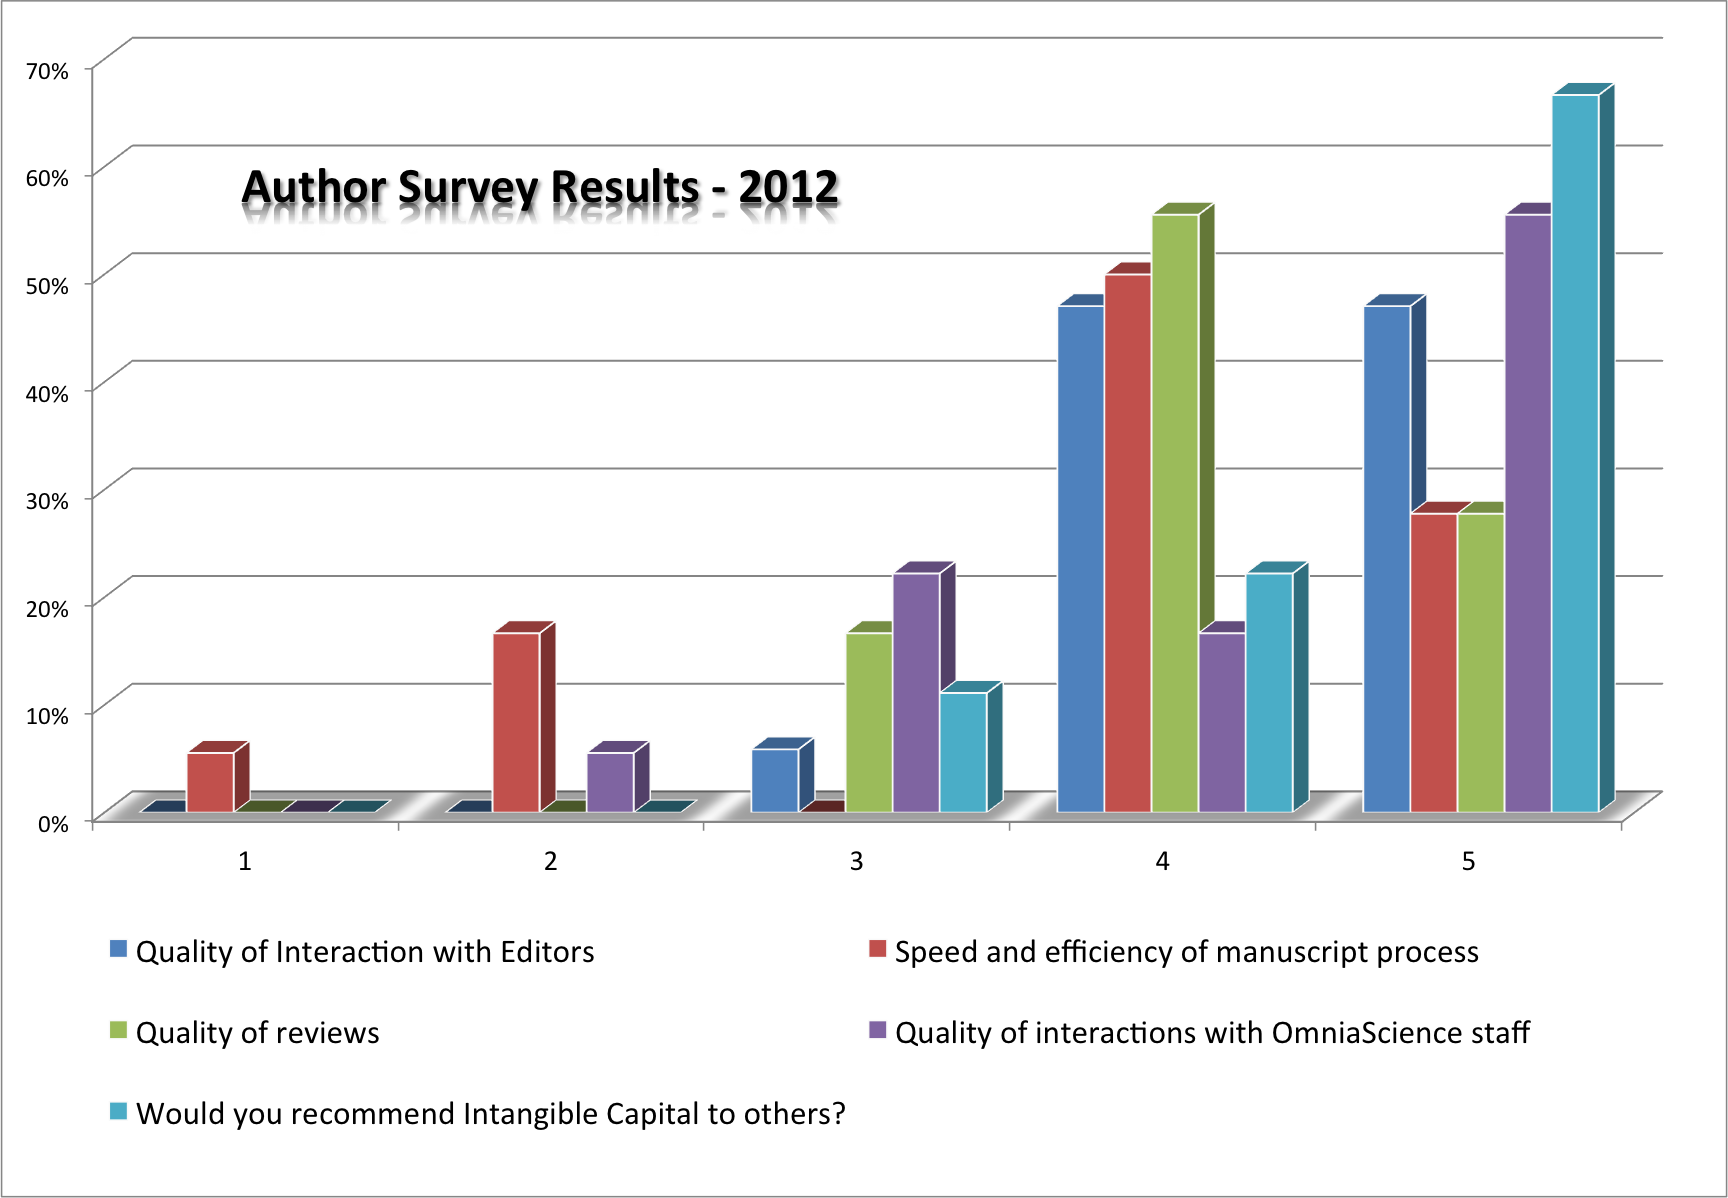 Author Survey Results 2012